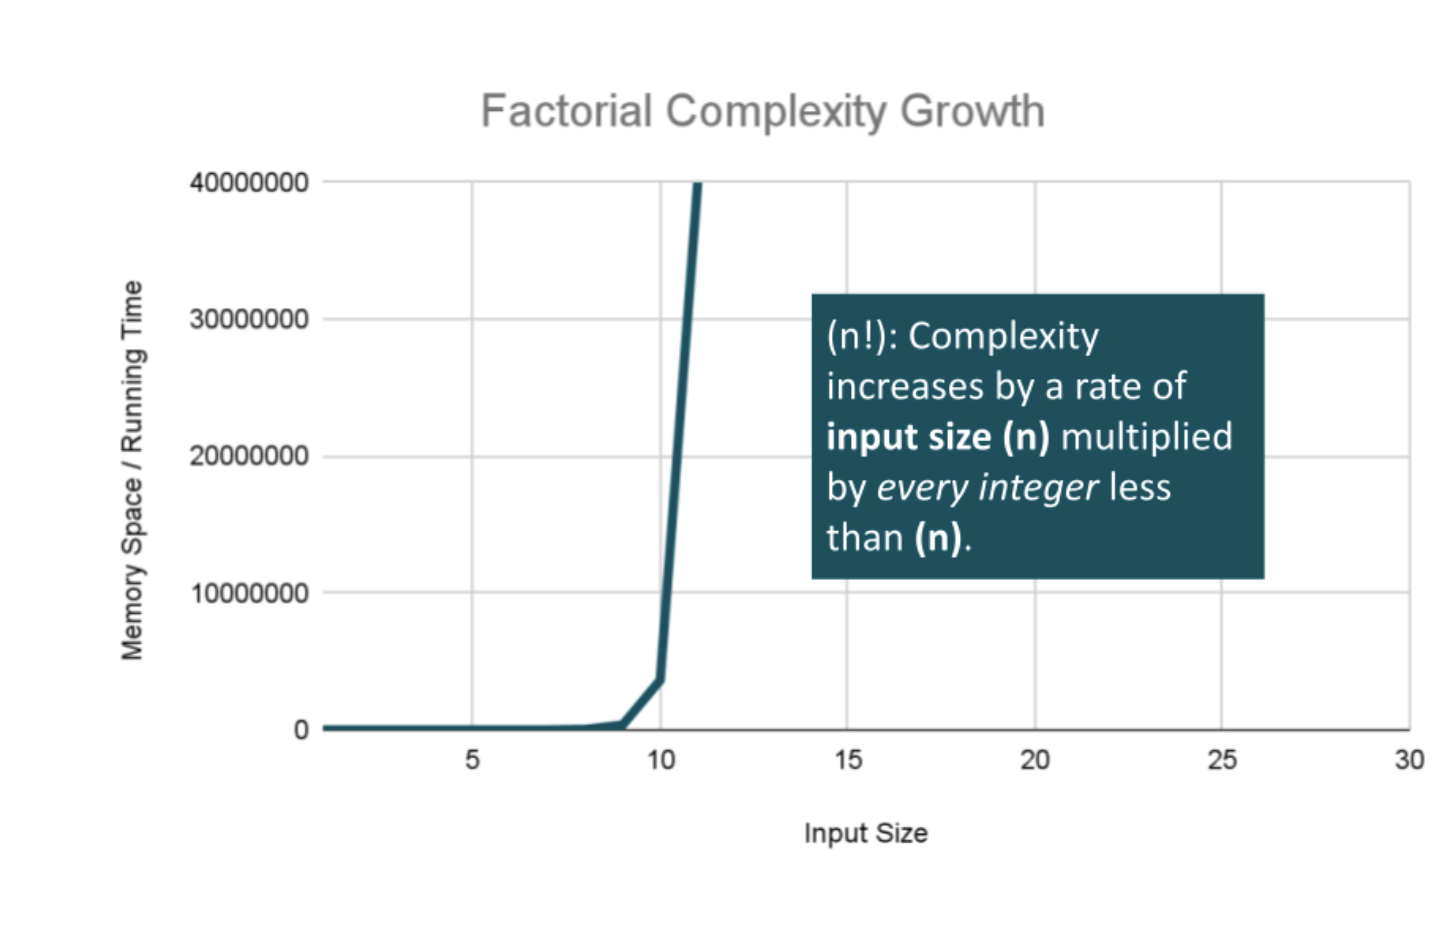 Factorial complexity